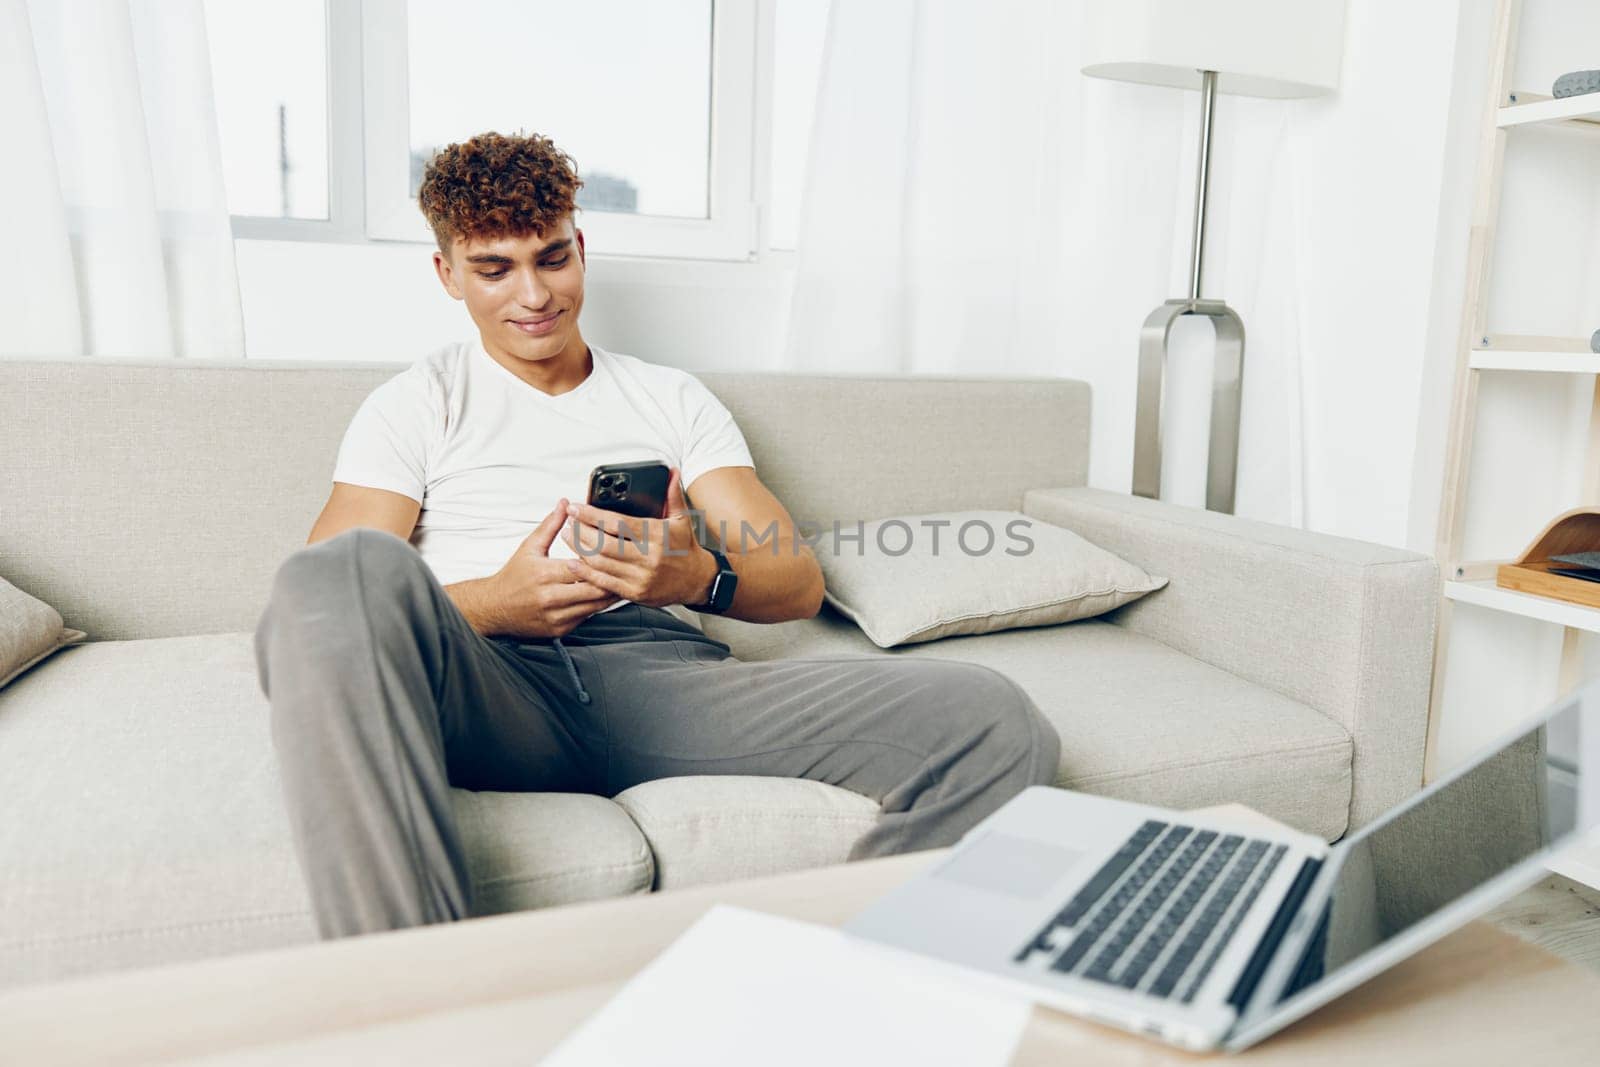 man interior phone couch adult smile laptop selfies communication sitting smartphone curly using smart holding cell home teenager modern